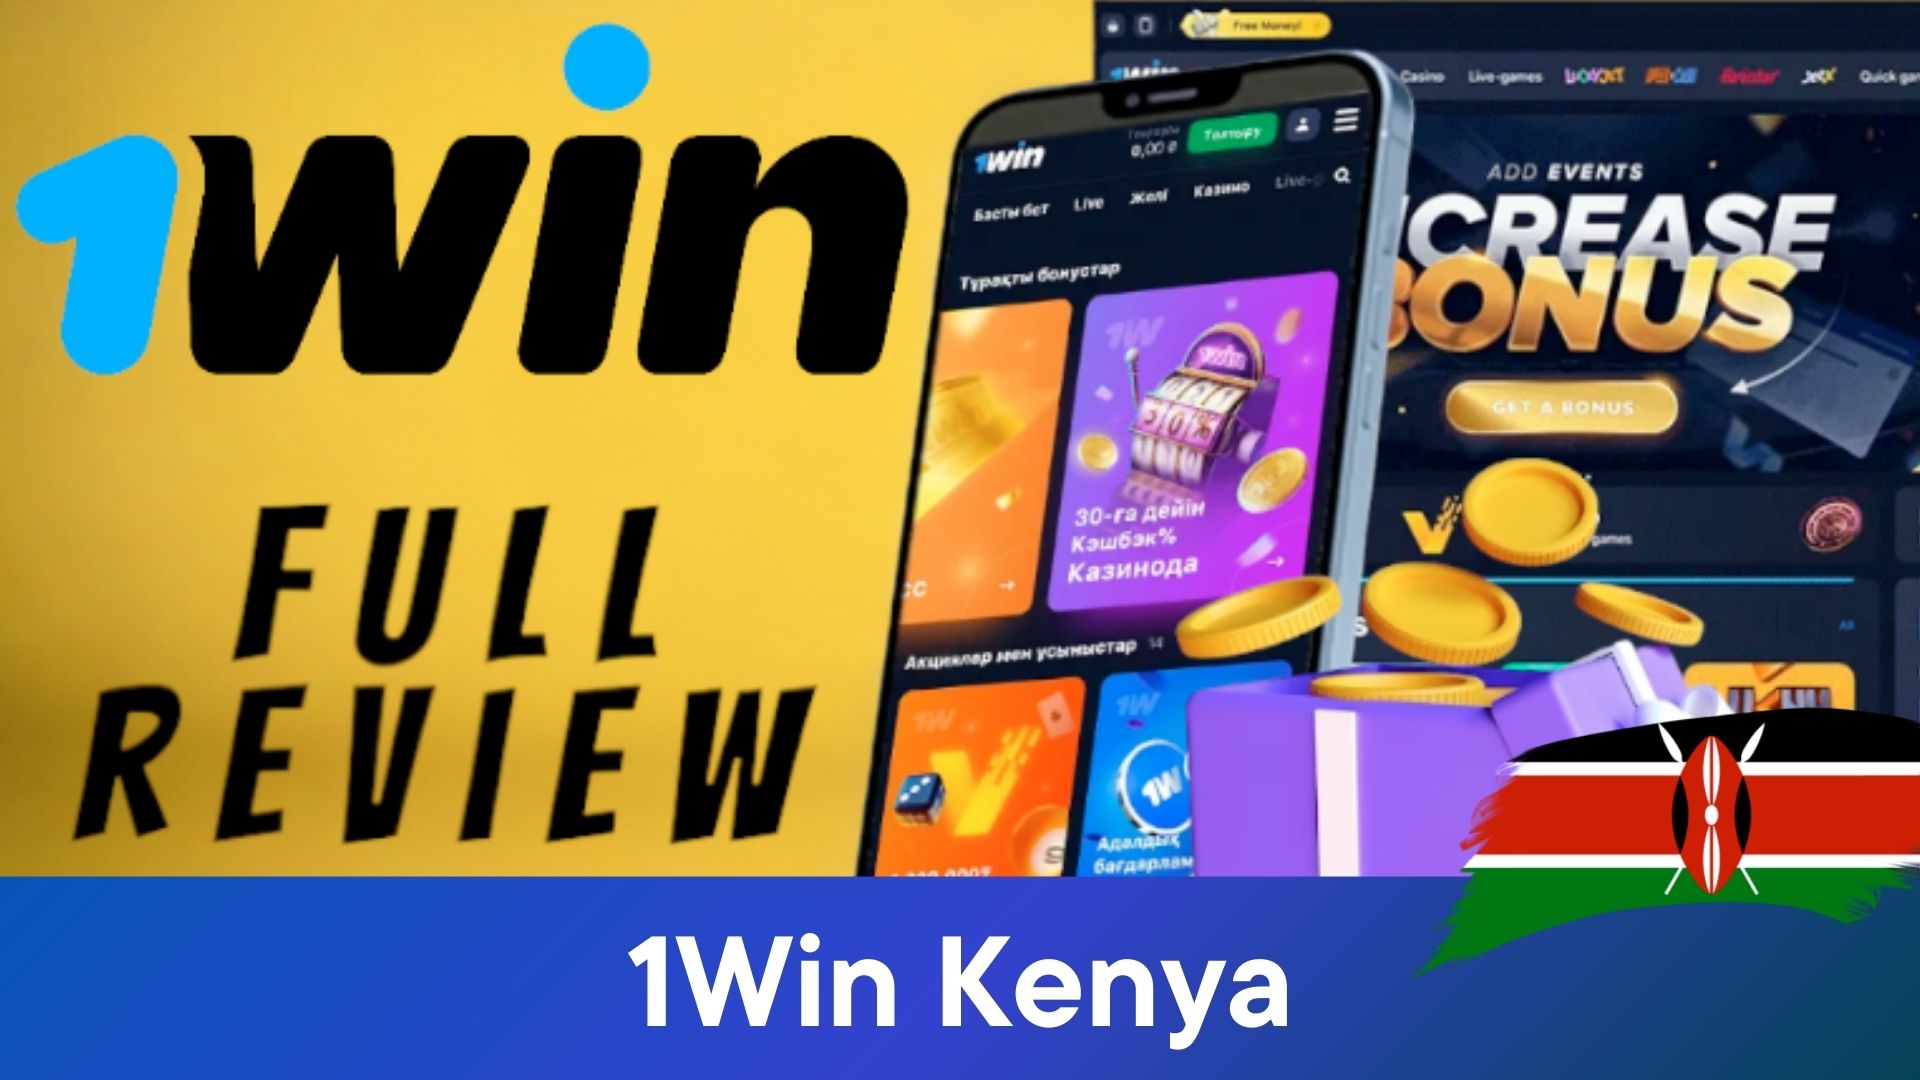 Overview of 1Win Key Features: The Optimal Betting Site for Kenyans